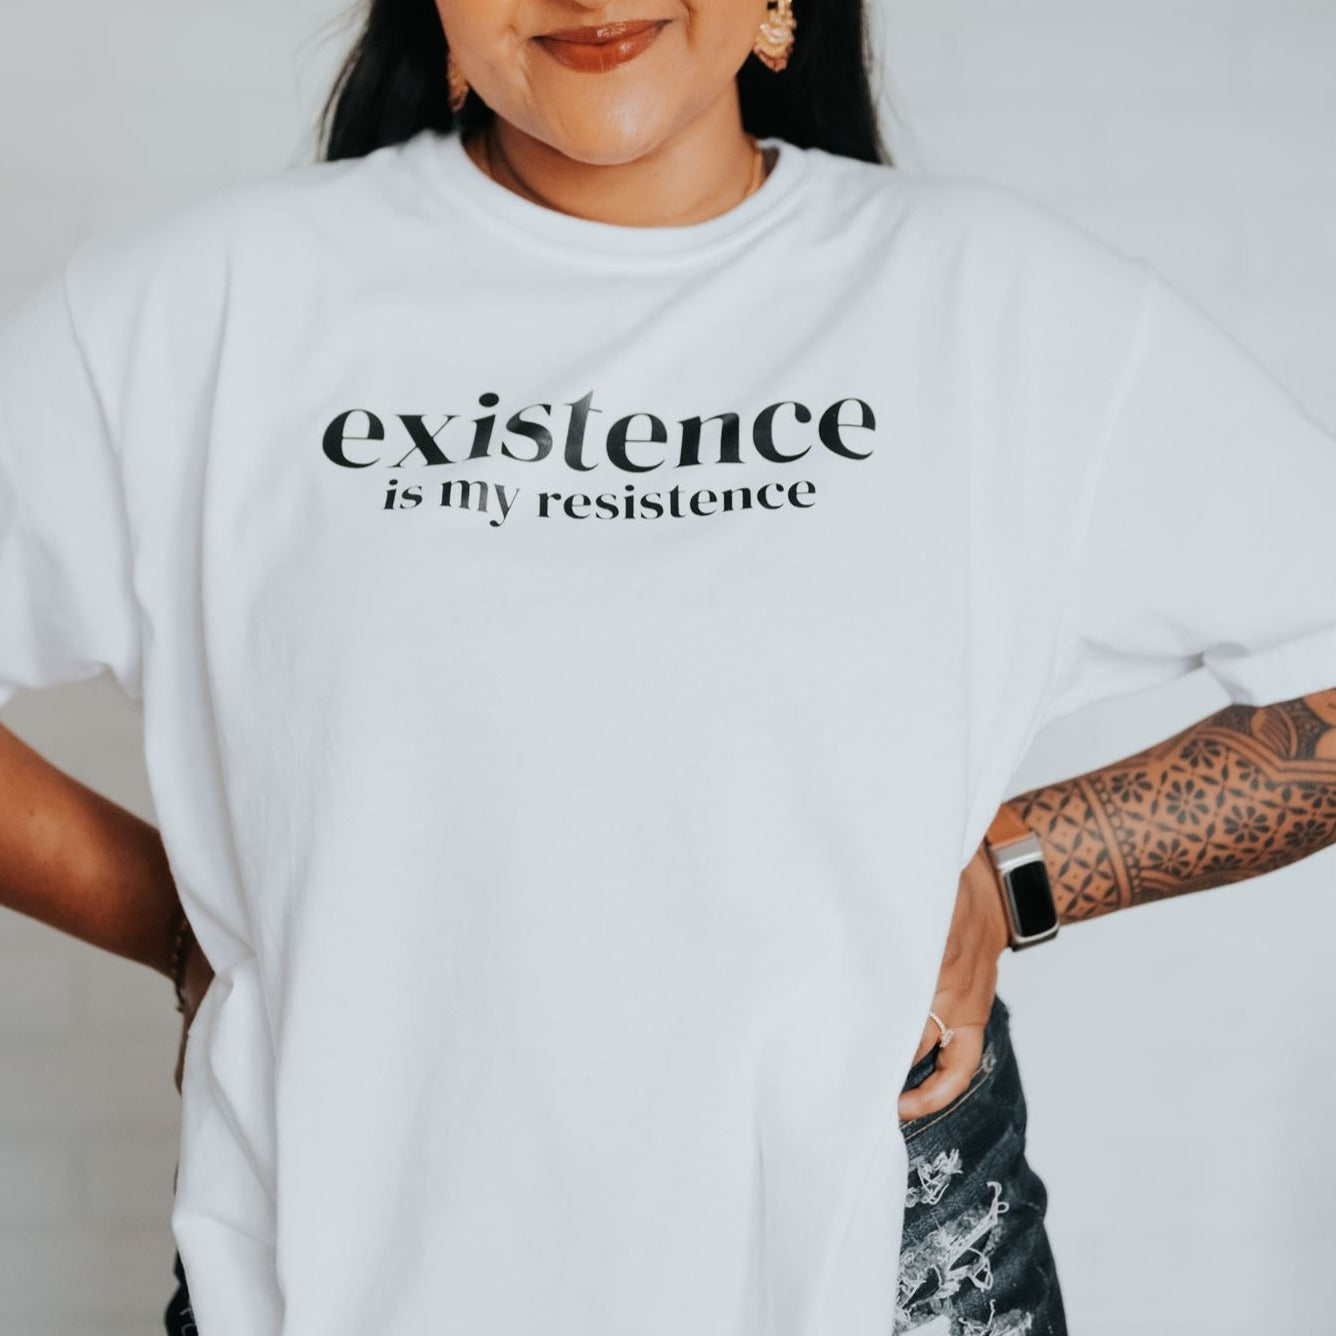 Jenny Jay is pictured wearing a white, oversized t-shirt. T-shirt reads 'Existence is My Resistance' in black text.v